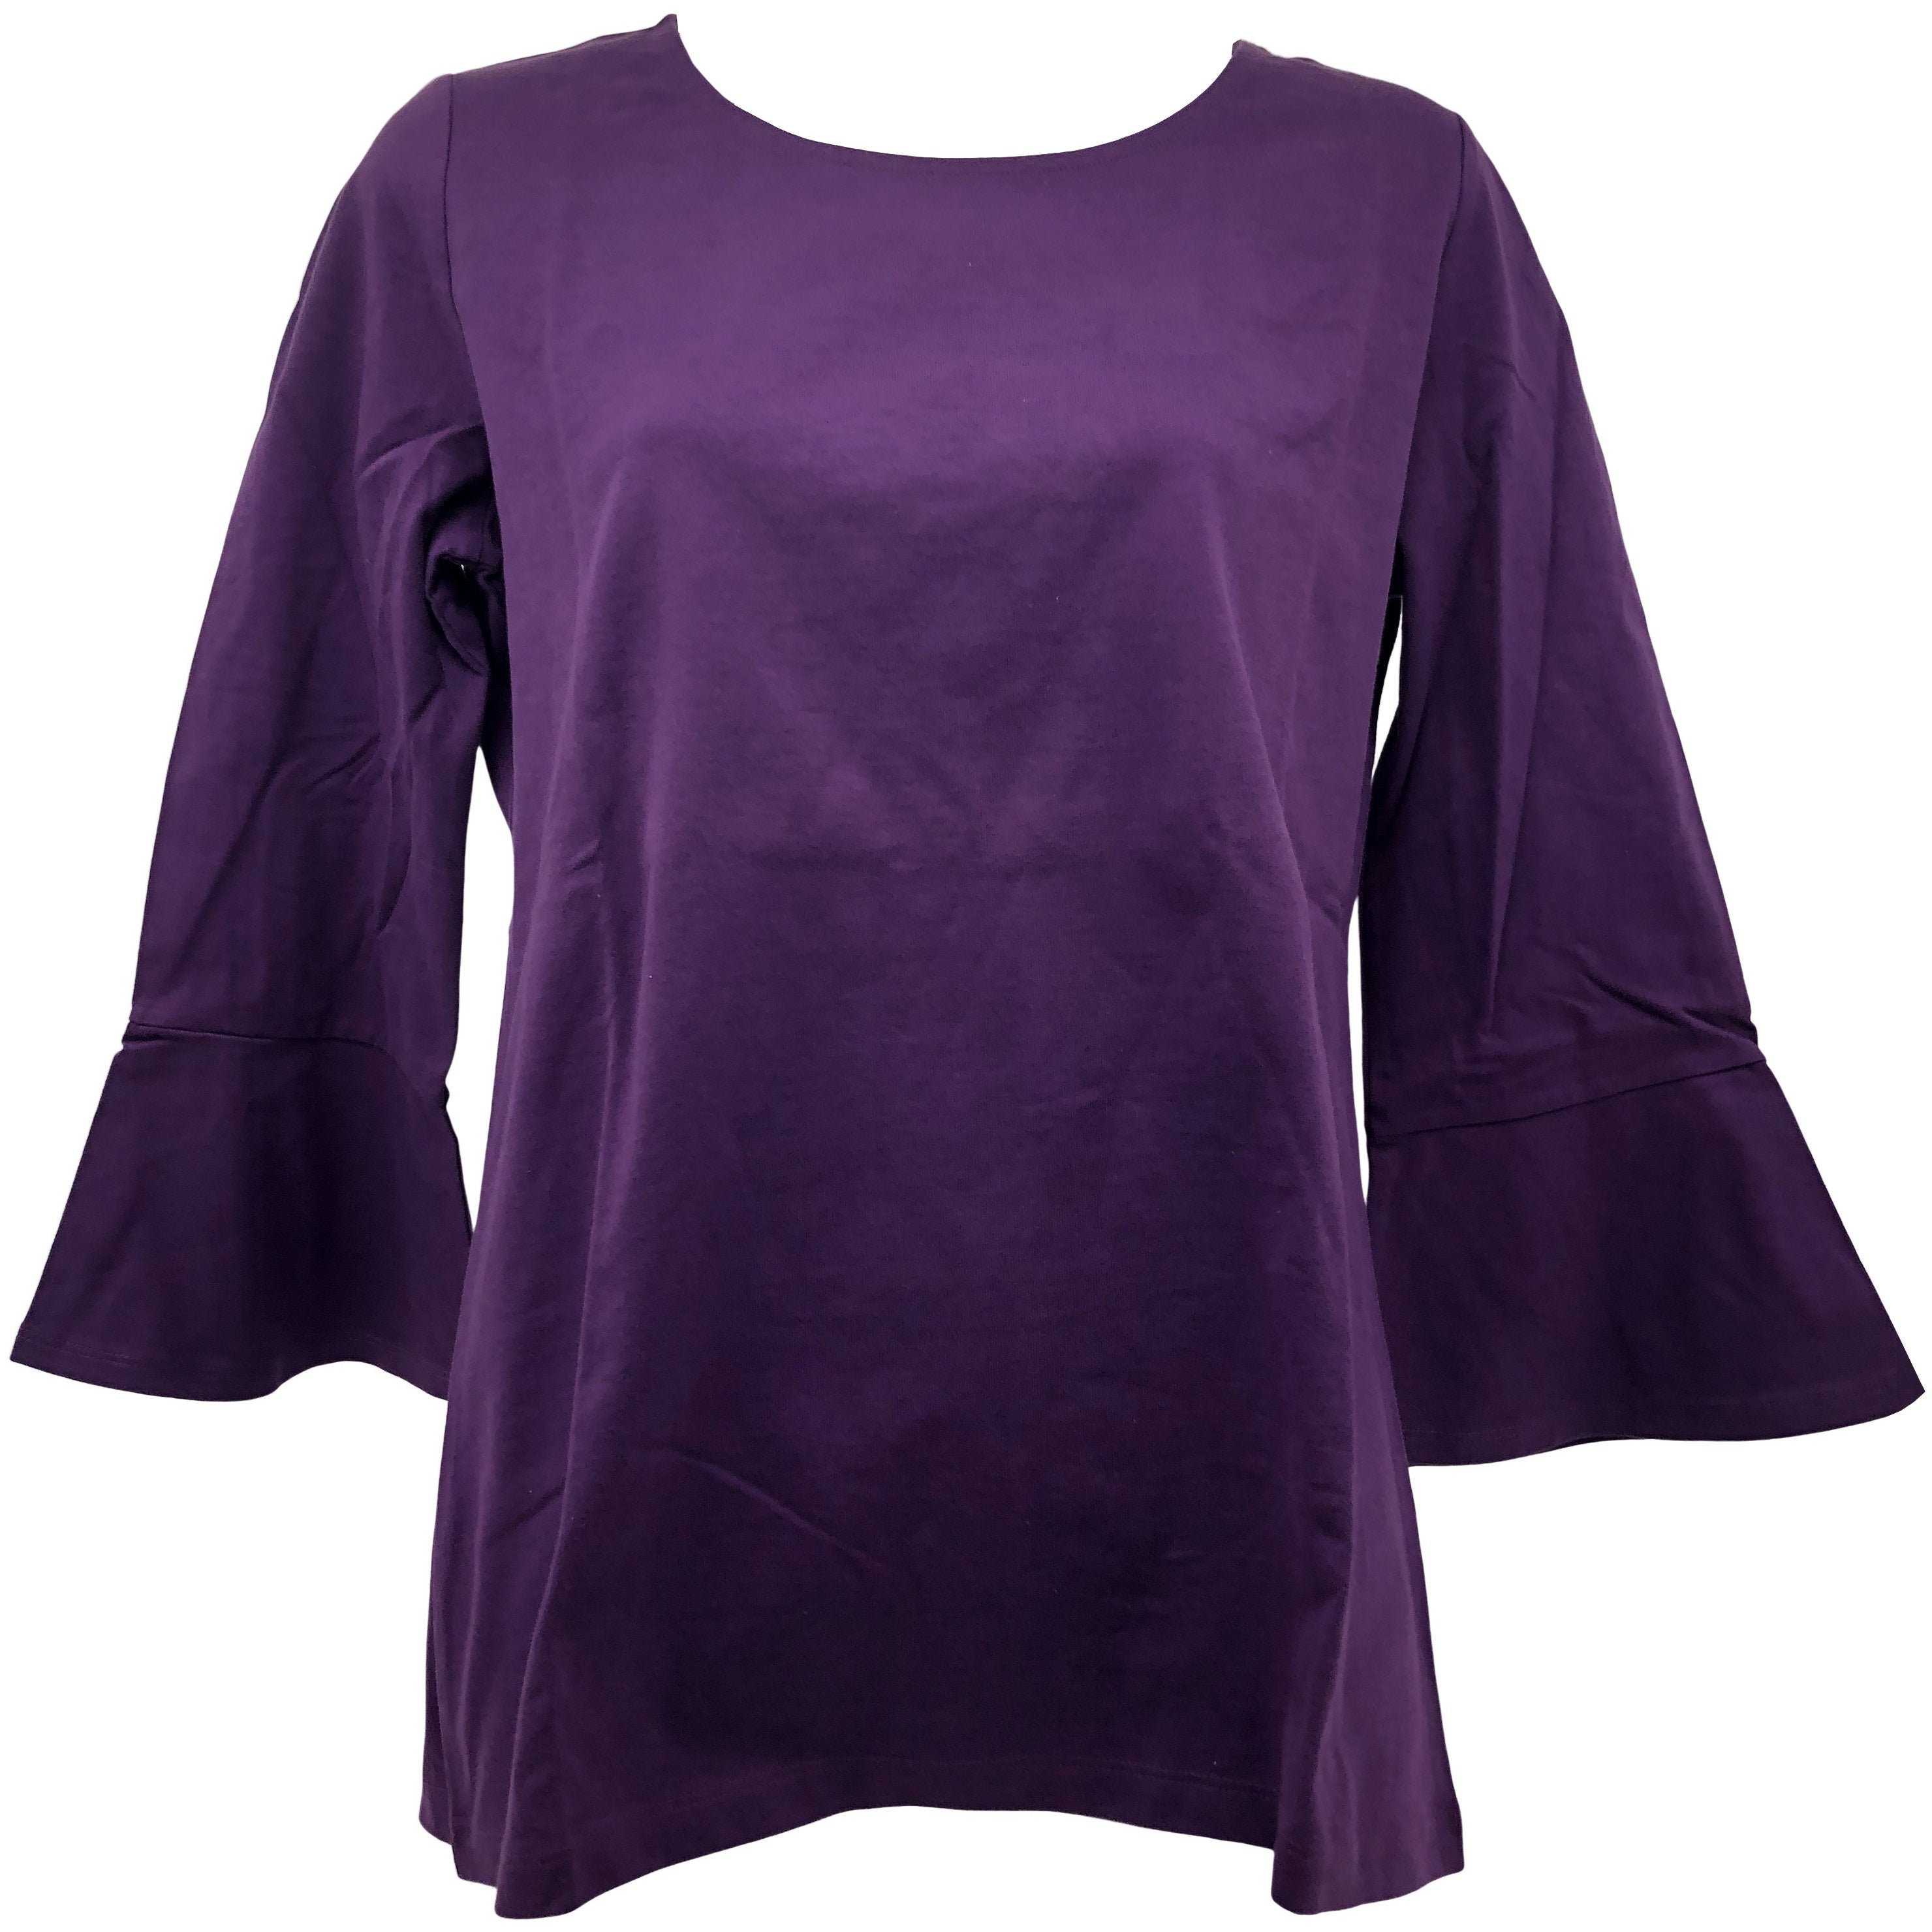 Segment's Women's Top / 3/4 Length Sleeves / Flared Sleeves / Size Small / Various Colours